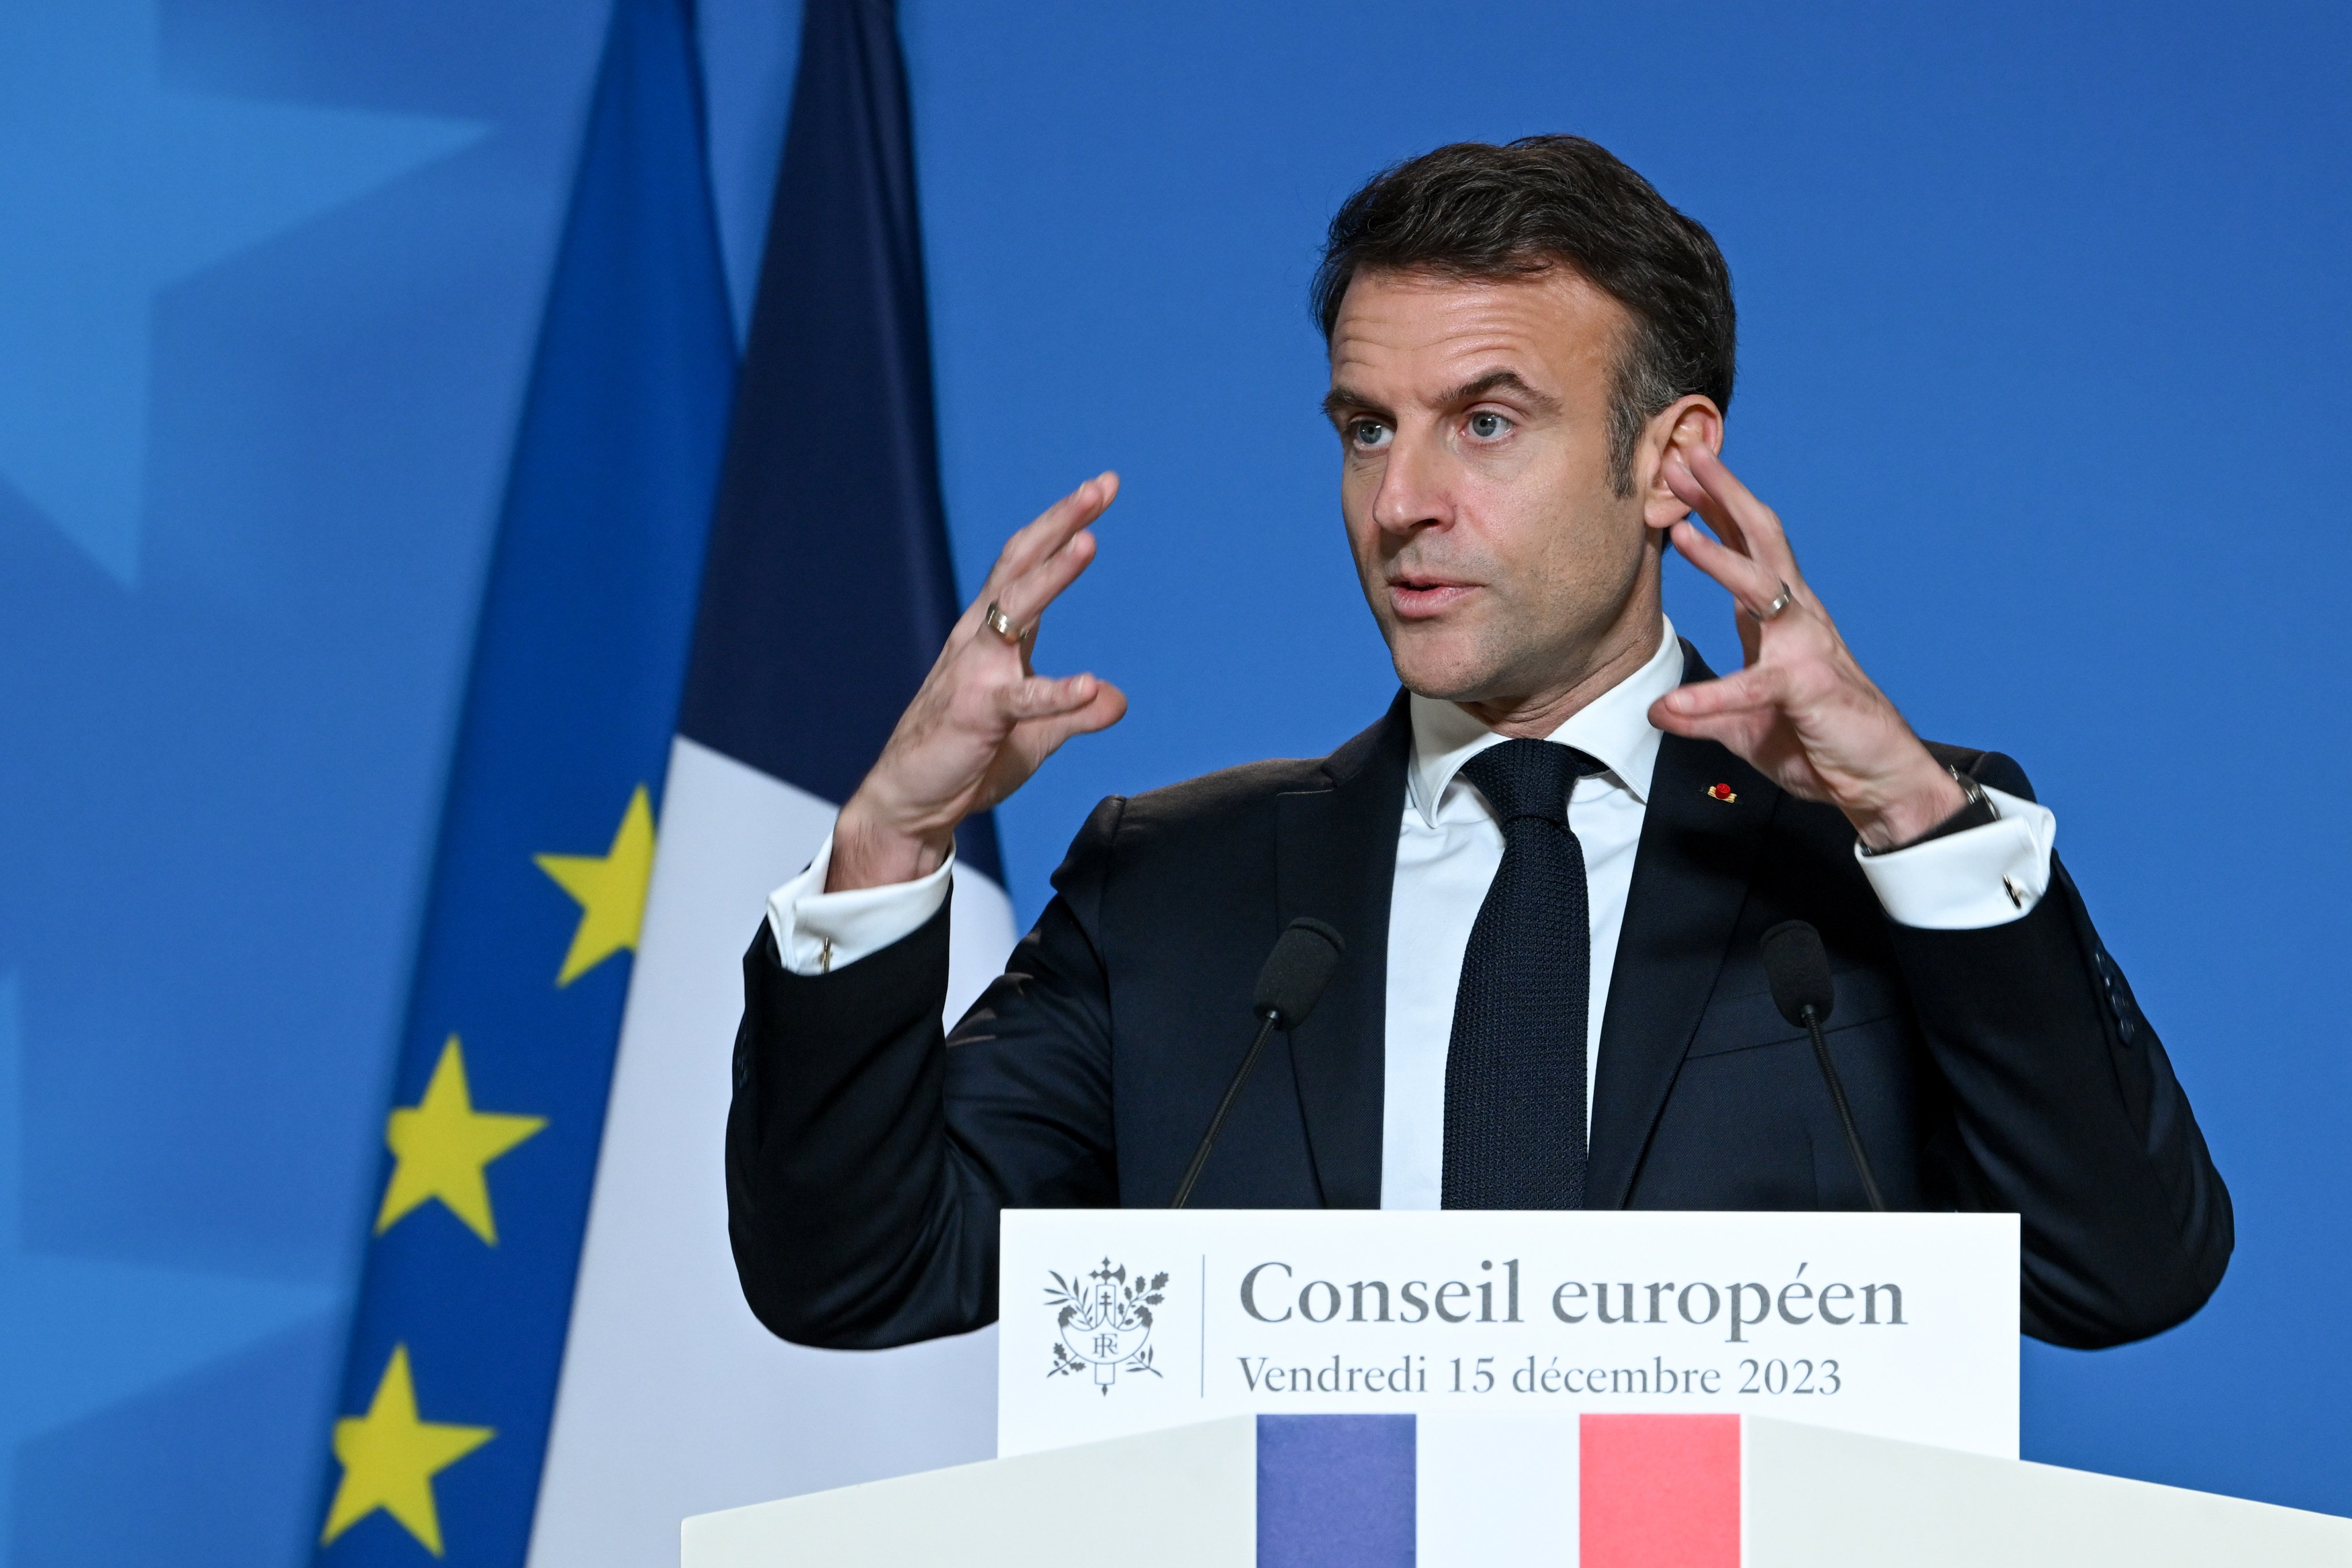 French President Emmanuel Macron speaks during a press conference during the second day of the EU Summit on December 15. Macron has seized upon a delay in negotiations over a trade deal between the European Union and Mercosur to register his strong disapproval given the potential effects on France’s agriculture sector. Photo: dpa